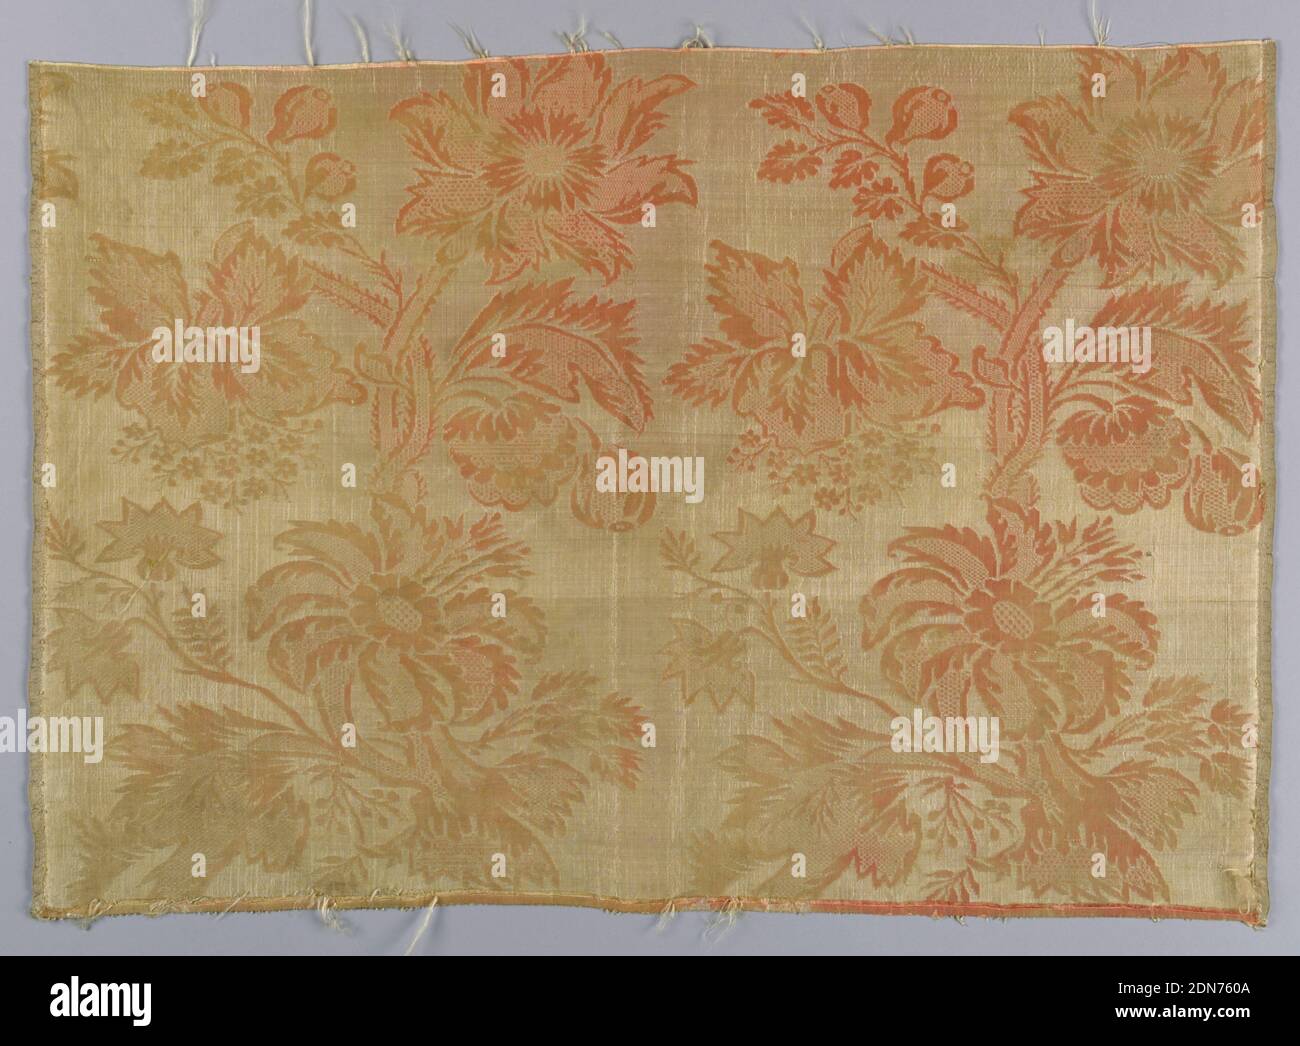 Textile, Medium: silk Technique: compound weave, Large-scale flowers and fruit on curving ogival stems, in white on salmon pink weft-ribbed ground. Two plain selvages., England, 18th century, woven textiles, Textile Stock Photo